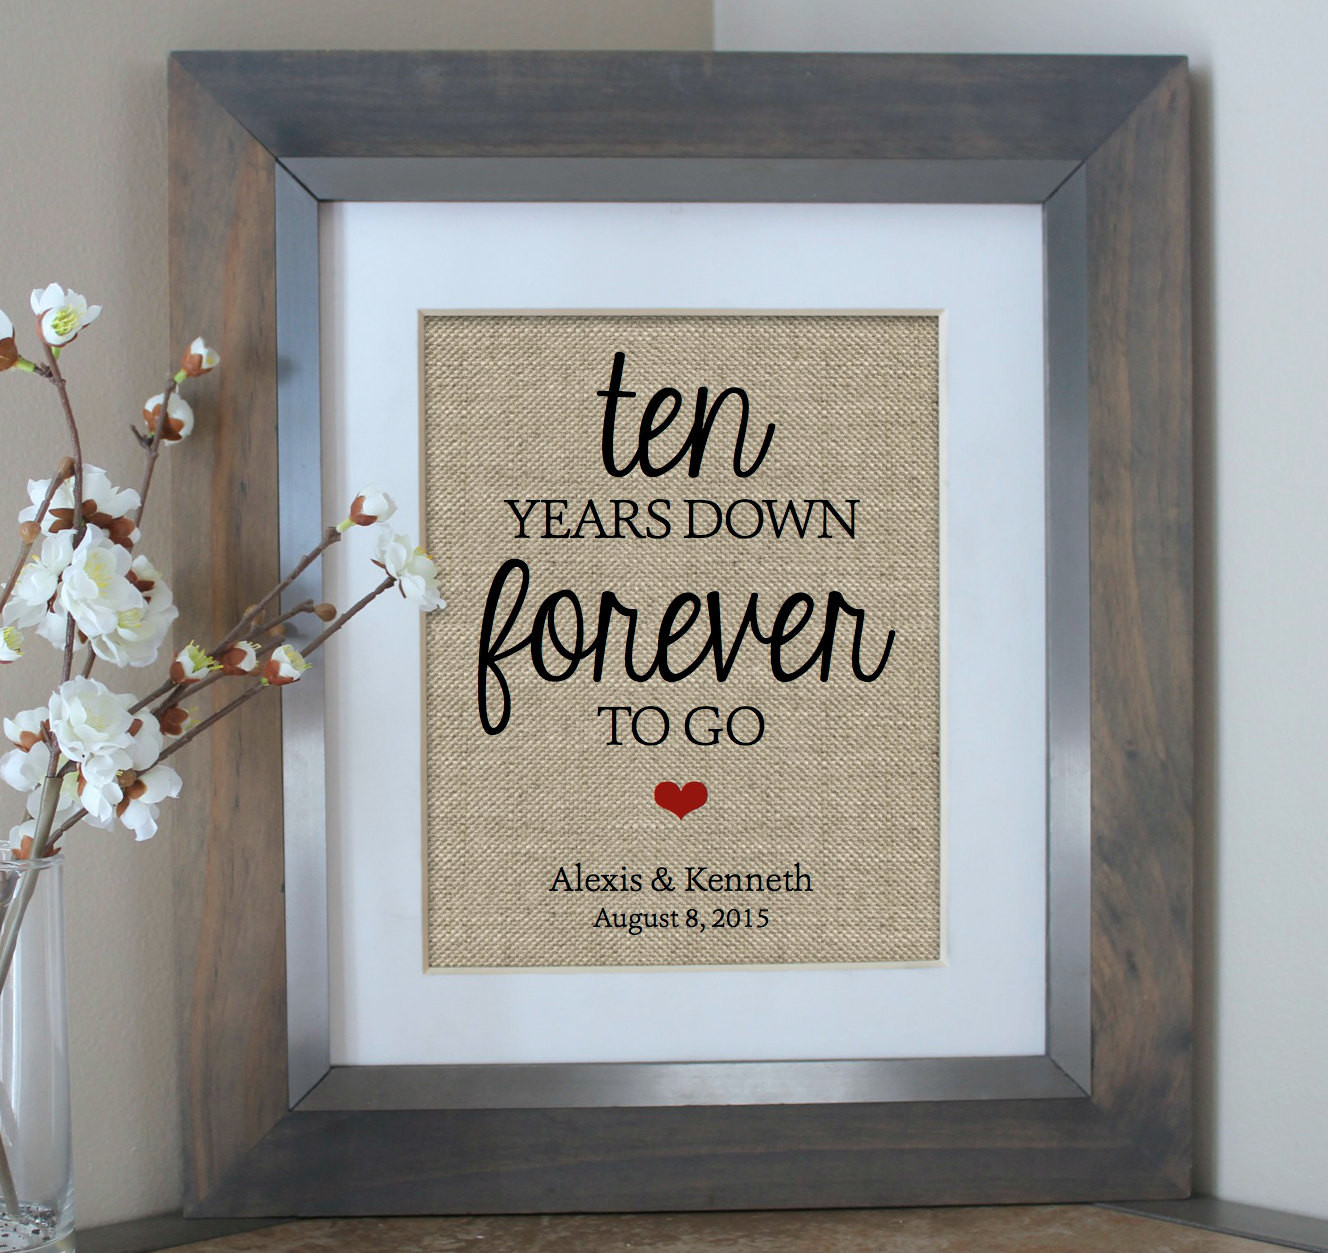 10 Yr Anniversary Gift Ideas
 The top 20 Ideas About 10 Year Anniversary Gift Ideas for